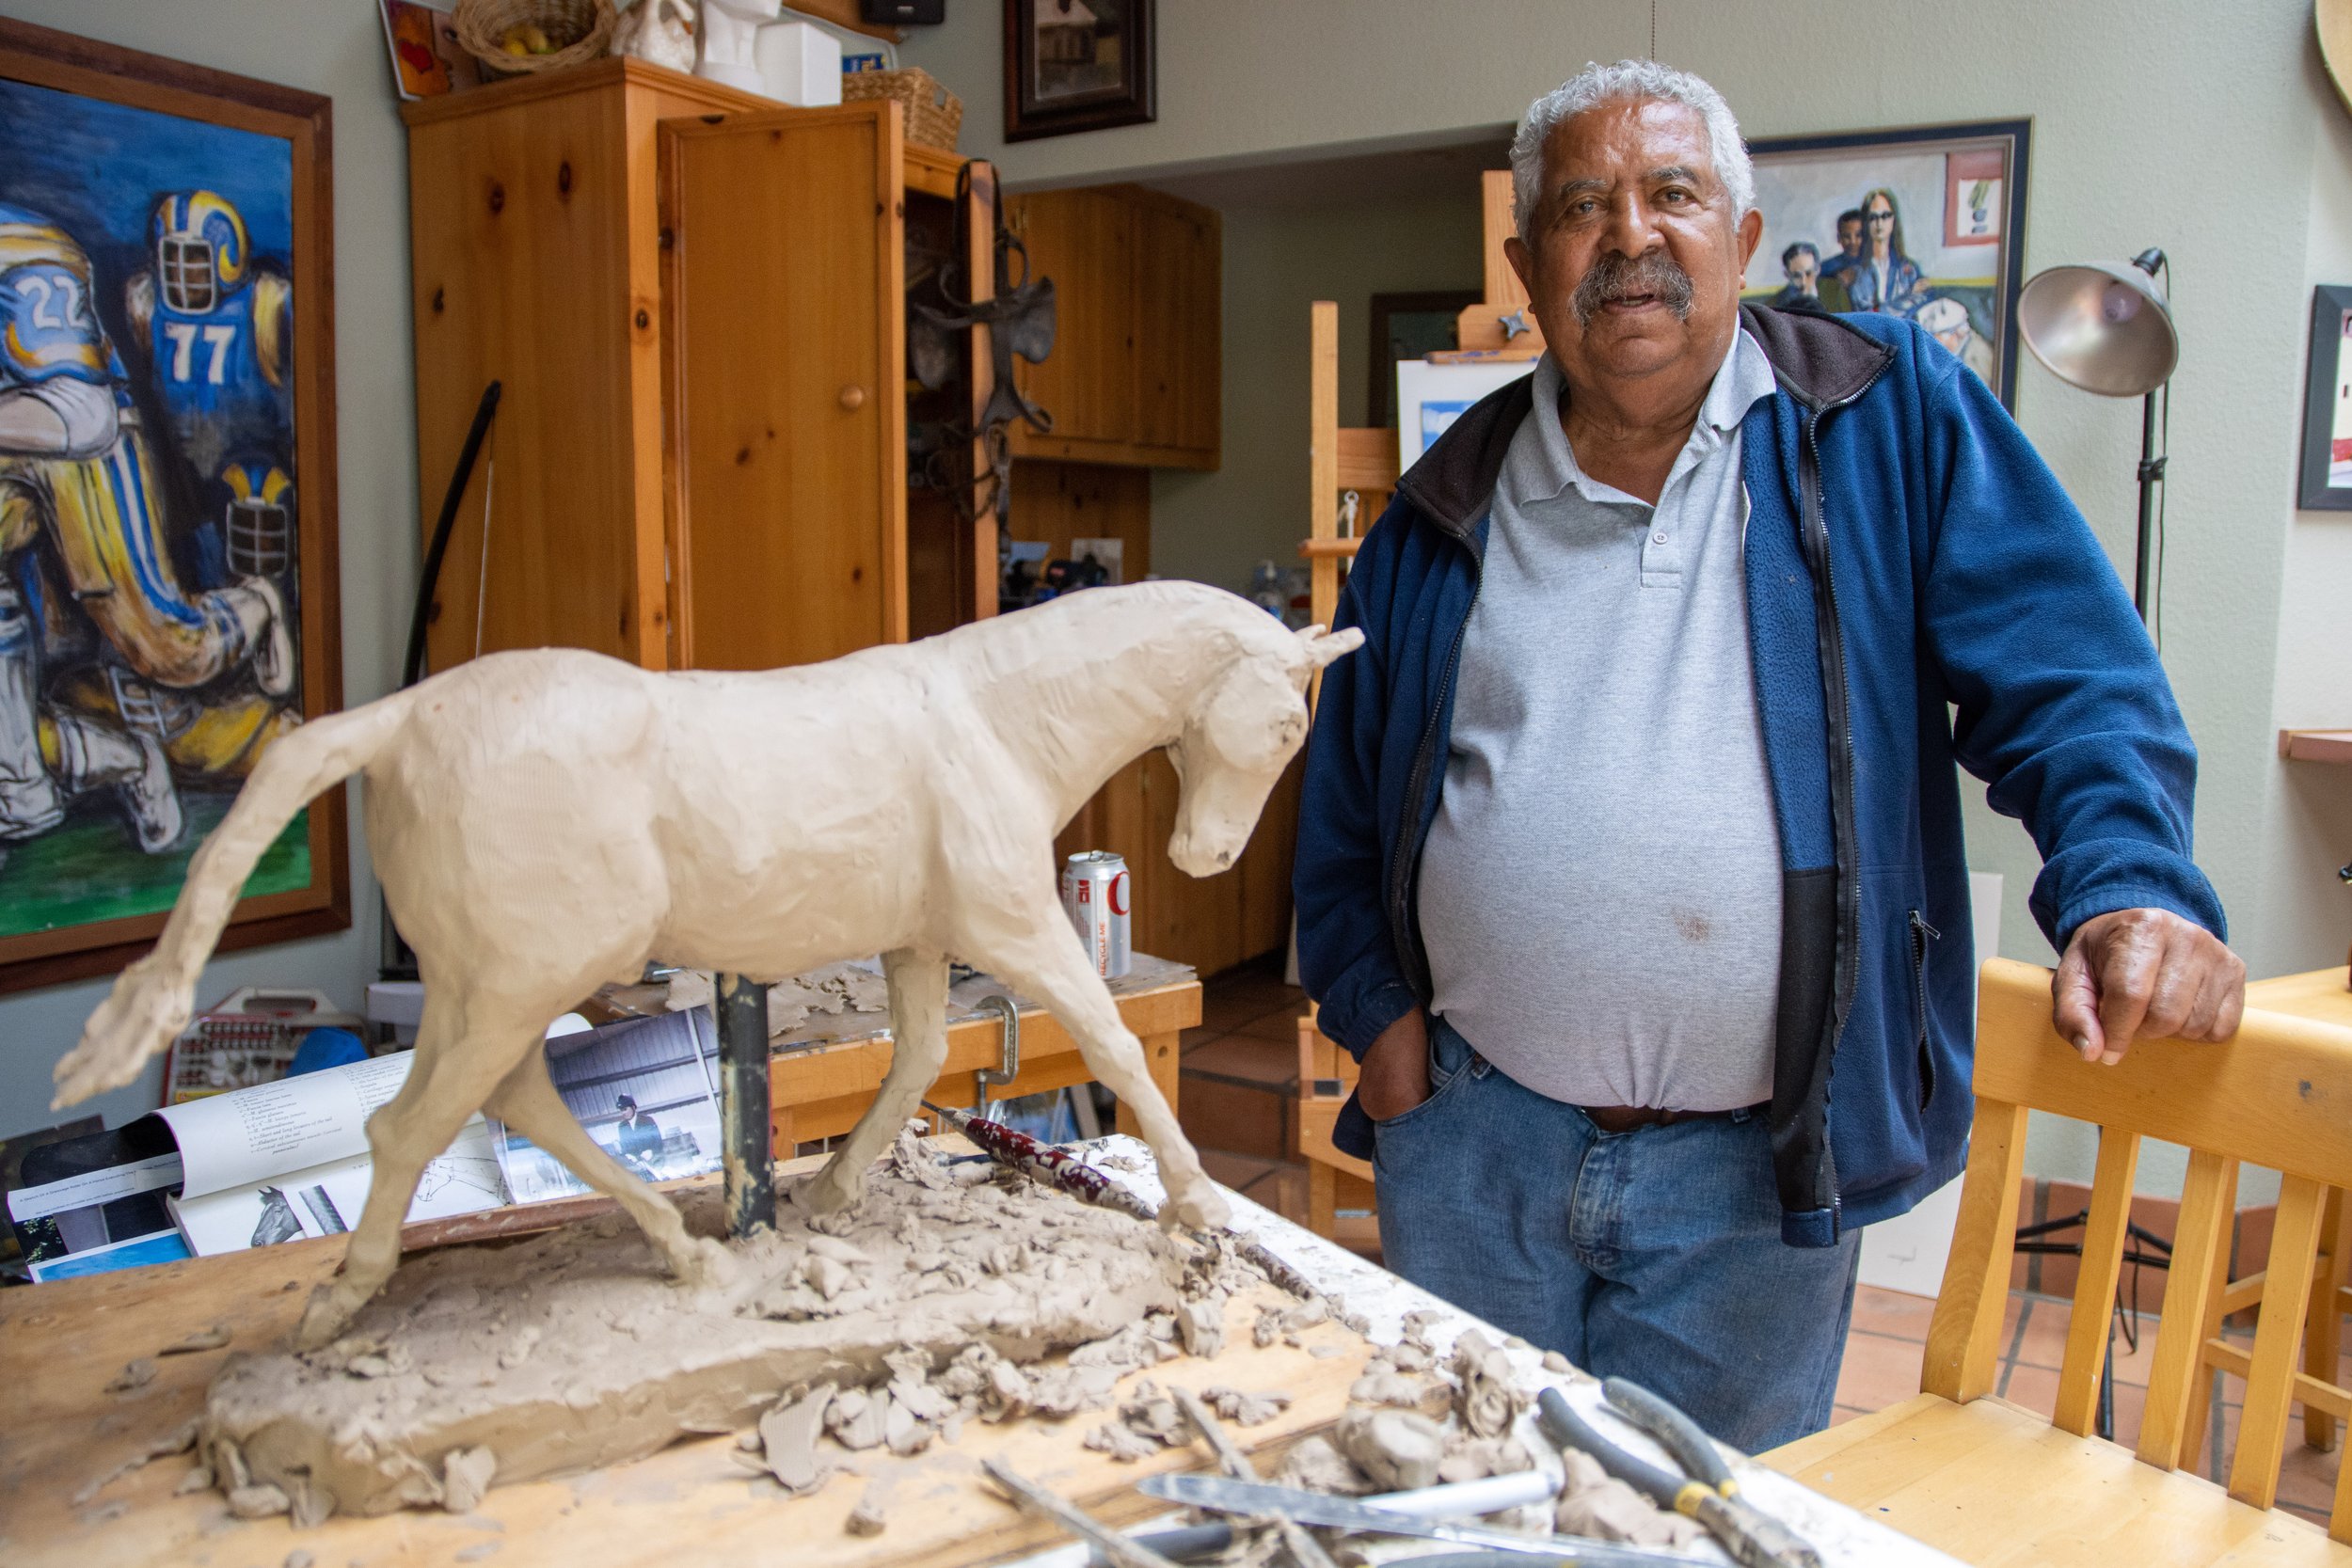 Errol Gordon, Equestrian Bronze Sculptor. He prefers to use a polymer clay called plasticine when creating his sculptures.  When asked about his inspiration he remarked, “Horses are in my blood.”